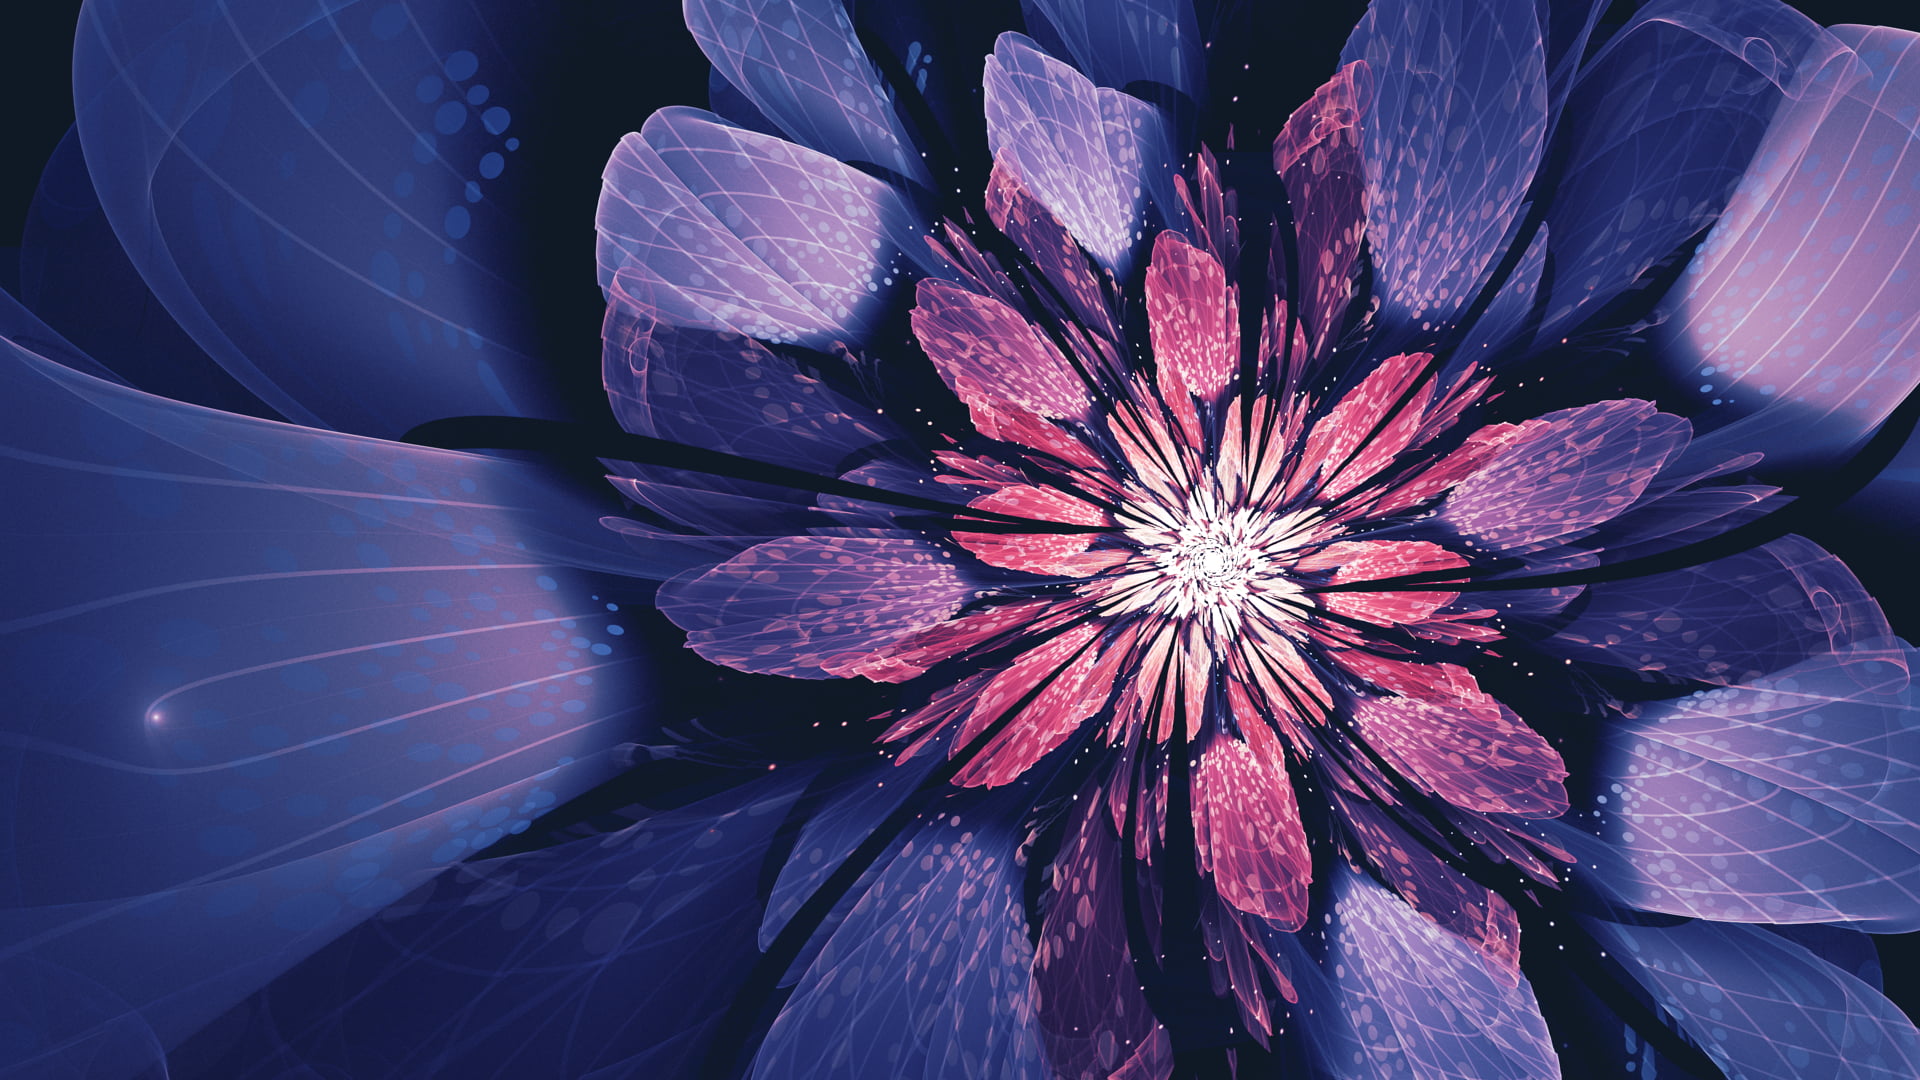 1920x1080 resolution | purple and red petaled flower illustration ...